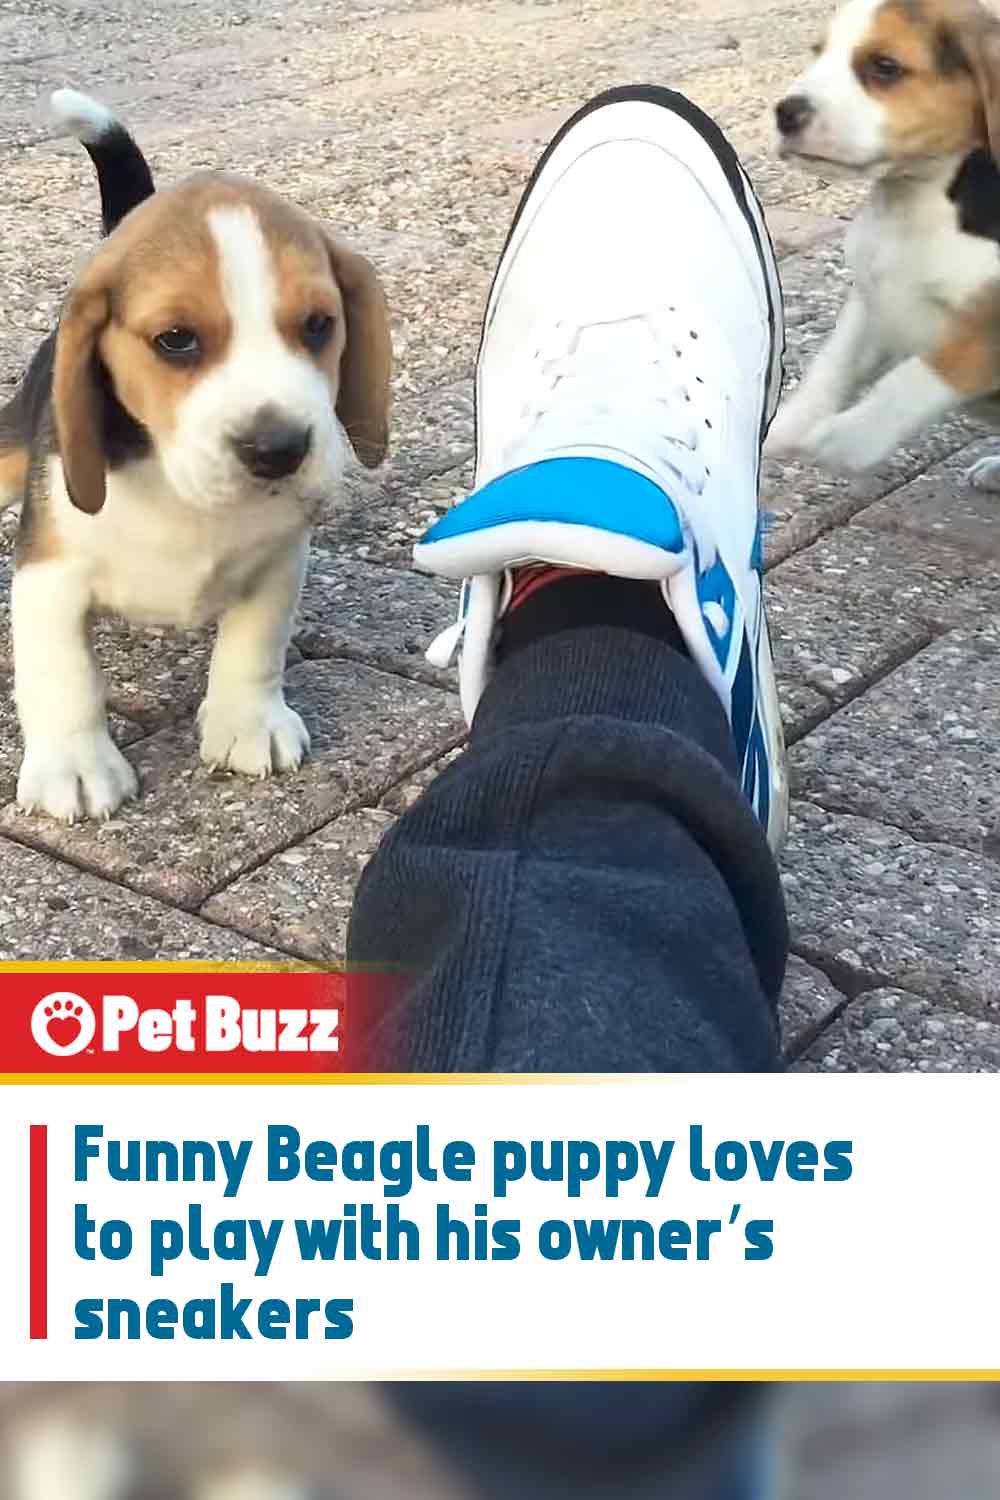 Funny Beagle puppy loves to play with his owner’s sneakers